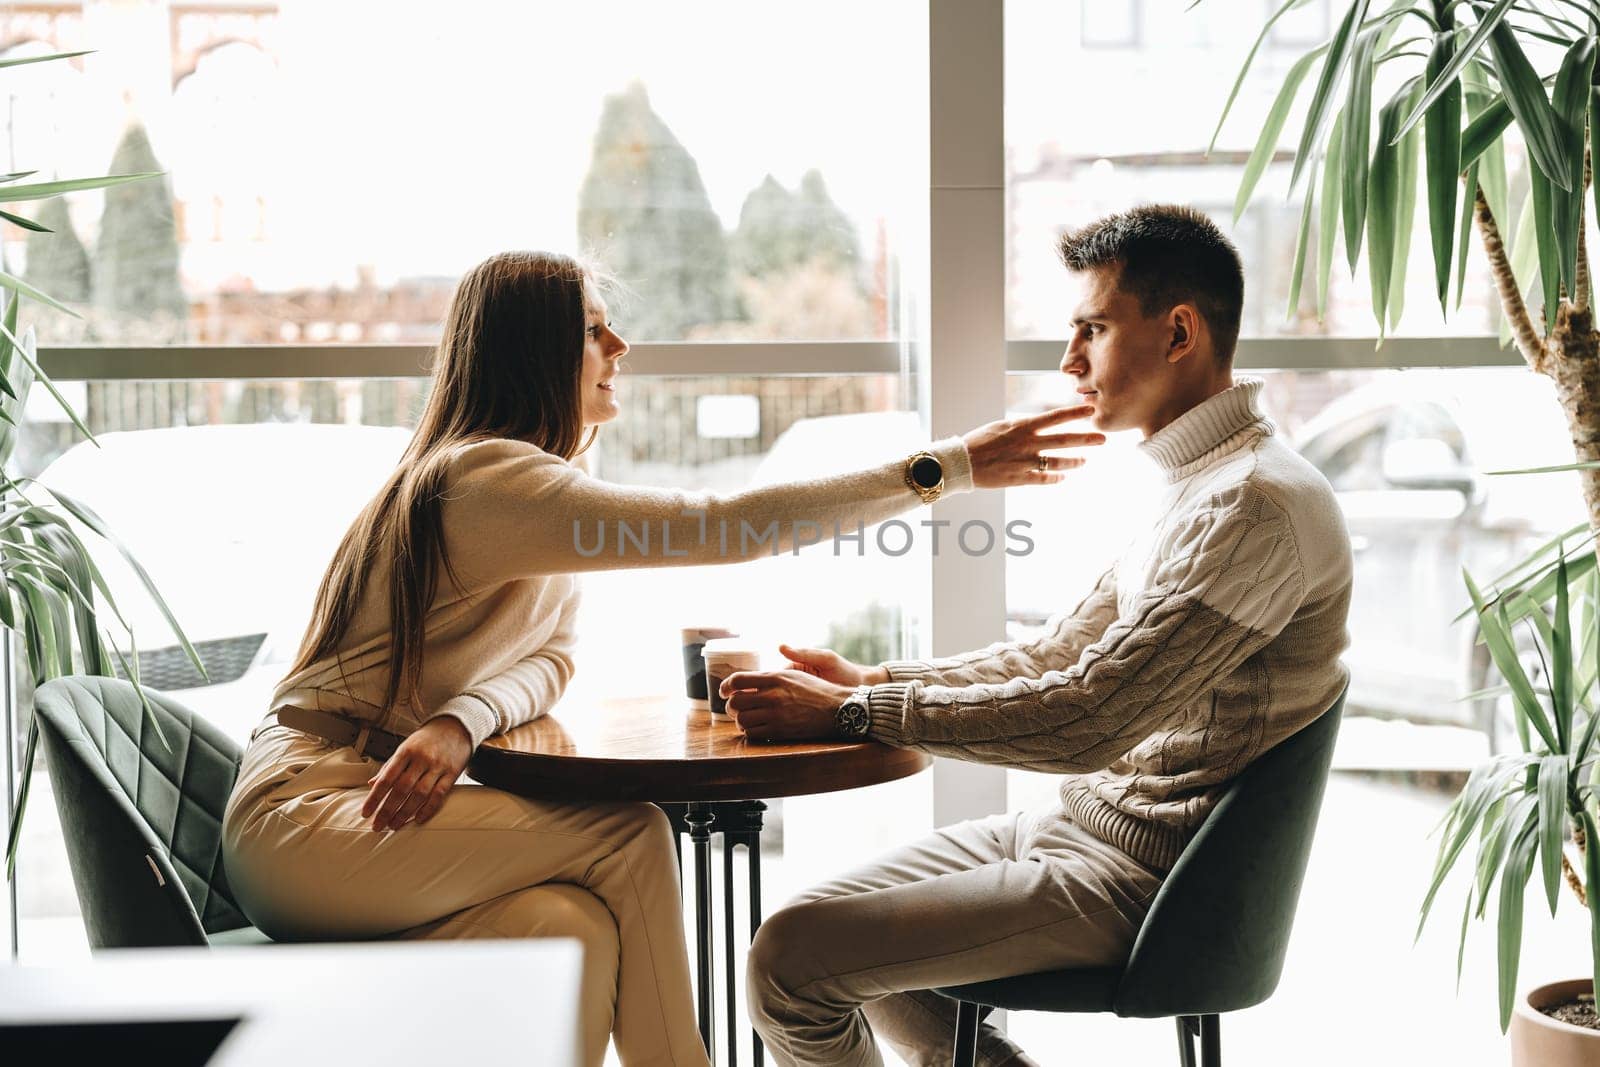 A man and a woman are seated across from each other at a wooden table in a well lit cafe with large windows and indoor plants. They are engaged in a relaxed conversation while sipping from coffee cups, suggesting a close and comfortable relationship between them.